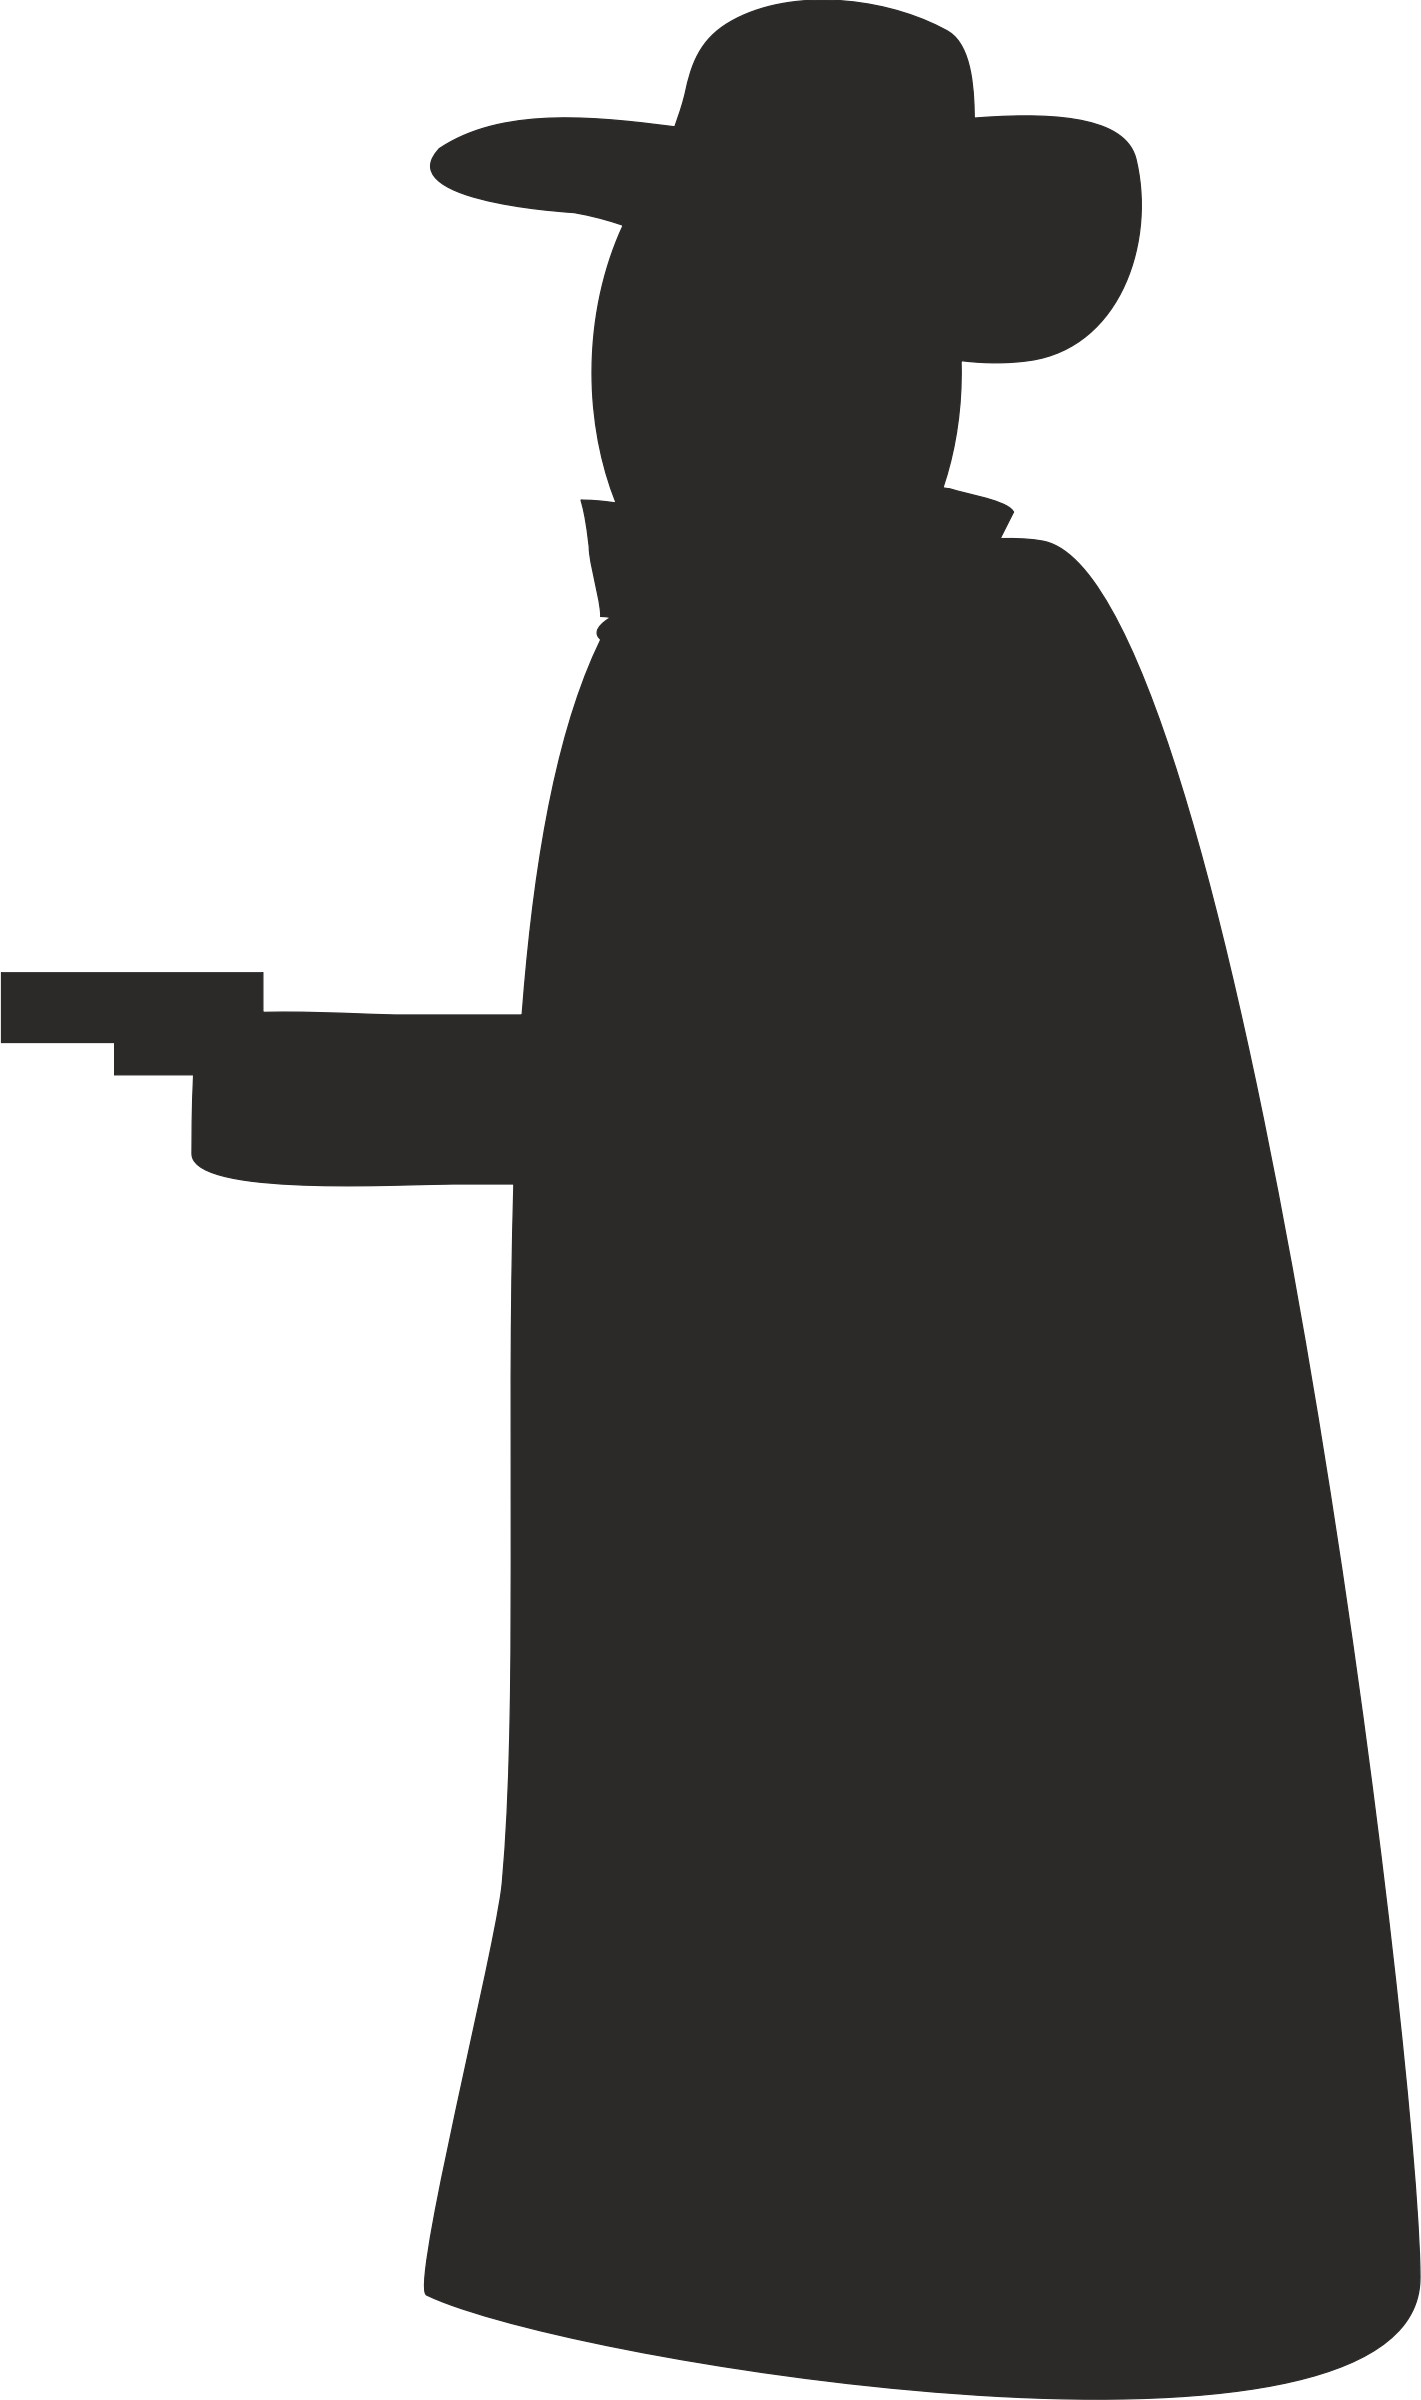 Big Image - Robber Silhouette Png (1421x2400)